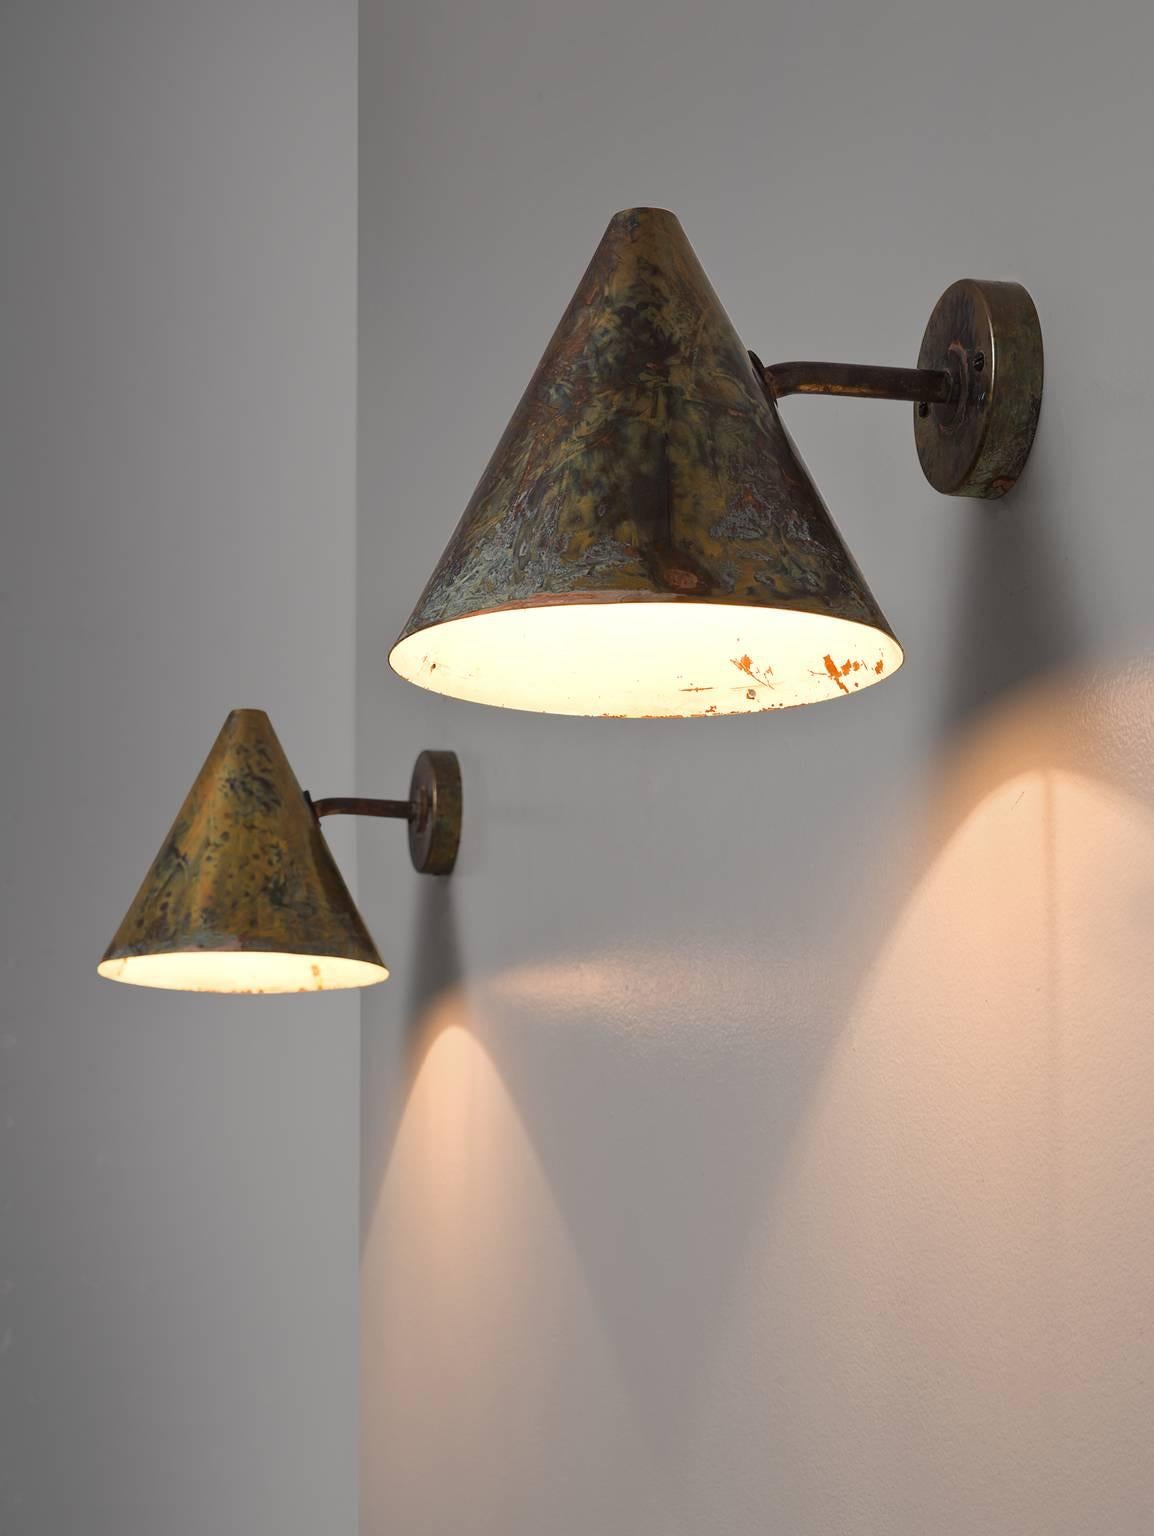 Hans-Agne Jakobsson for AB Markaryd, pair of wall lights, copper, by Sweden, 1950s. 

Pair of cone-shaped wall lights designed by Hans-Agne Jakobsson for AB Markaryd, in beautifully patinated copper with an off-white interior. The light this model